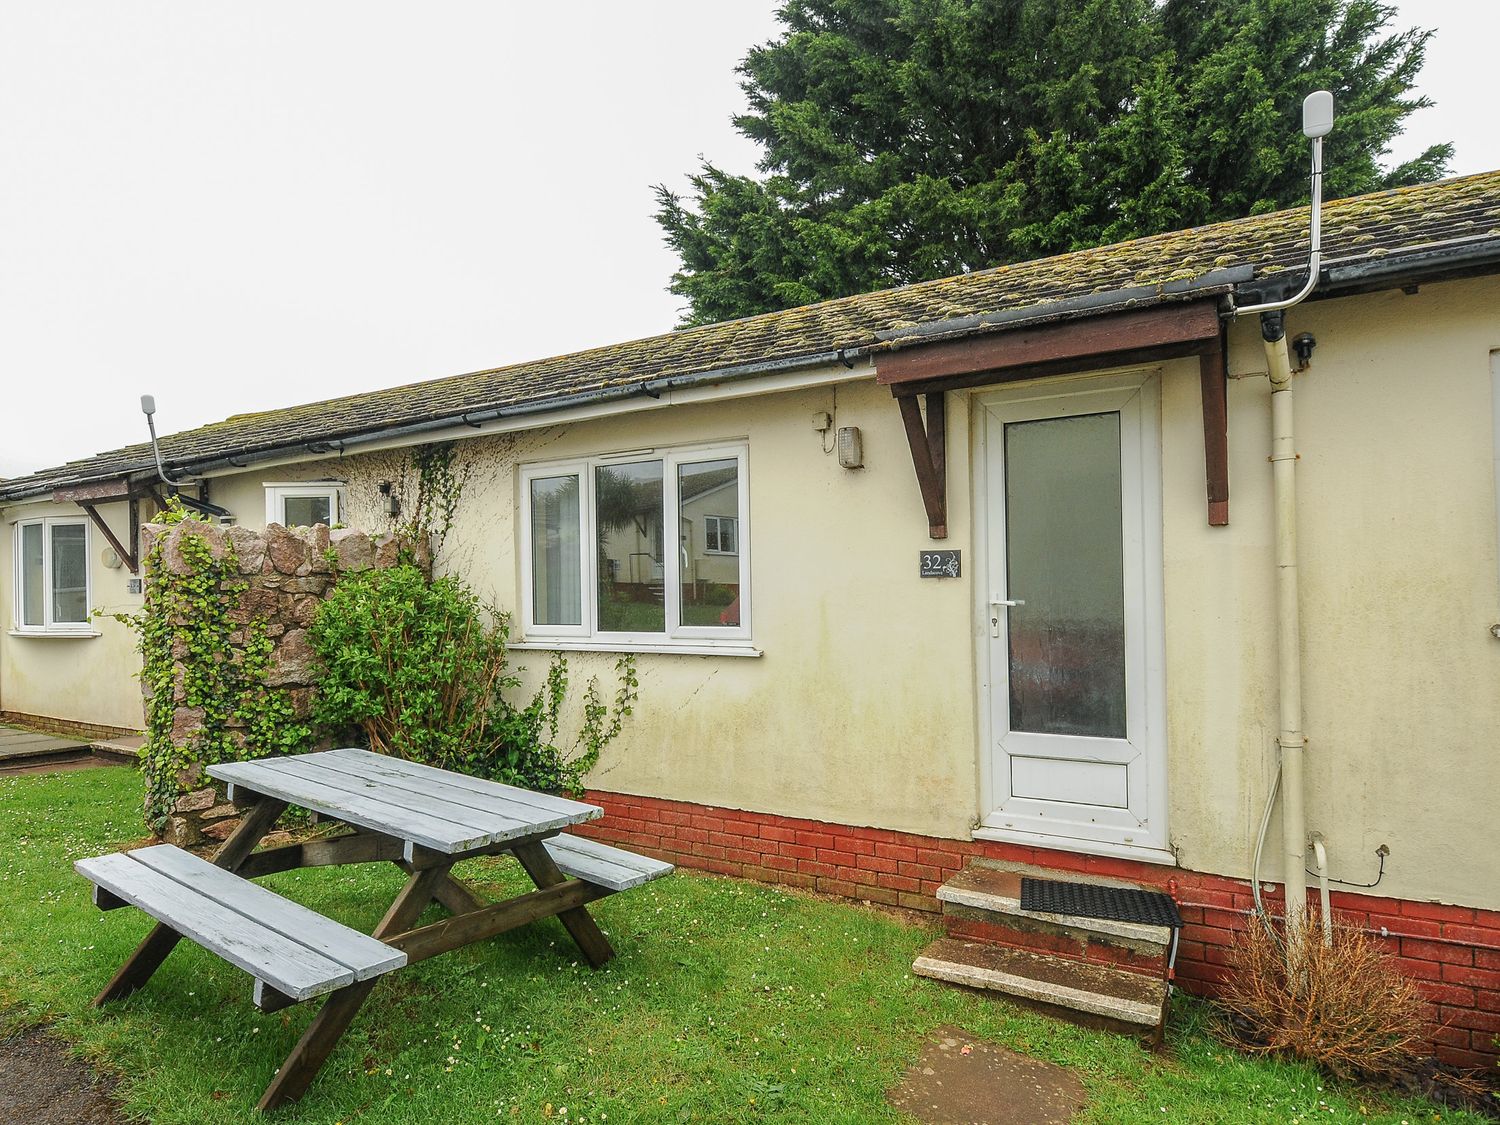 2 Bed Silver Chalet Plot T032 with pets - Devon - 1154787 - photo 1